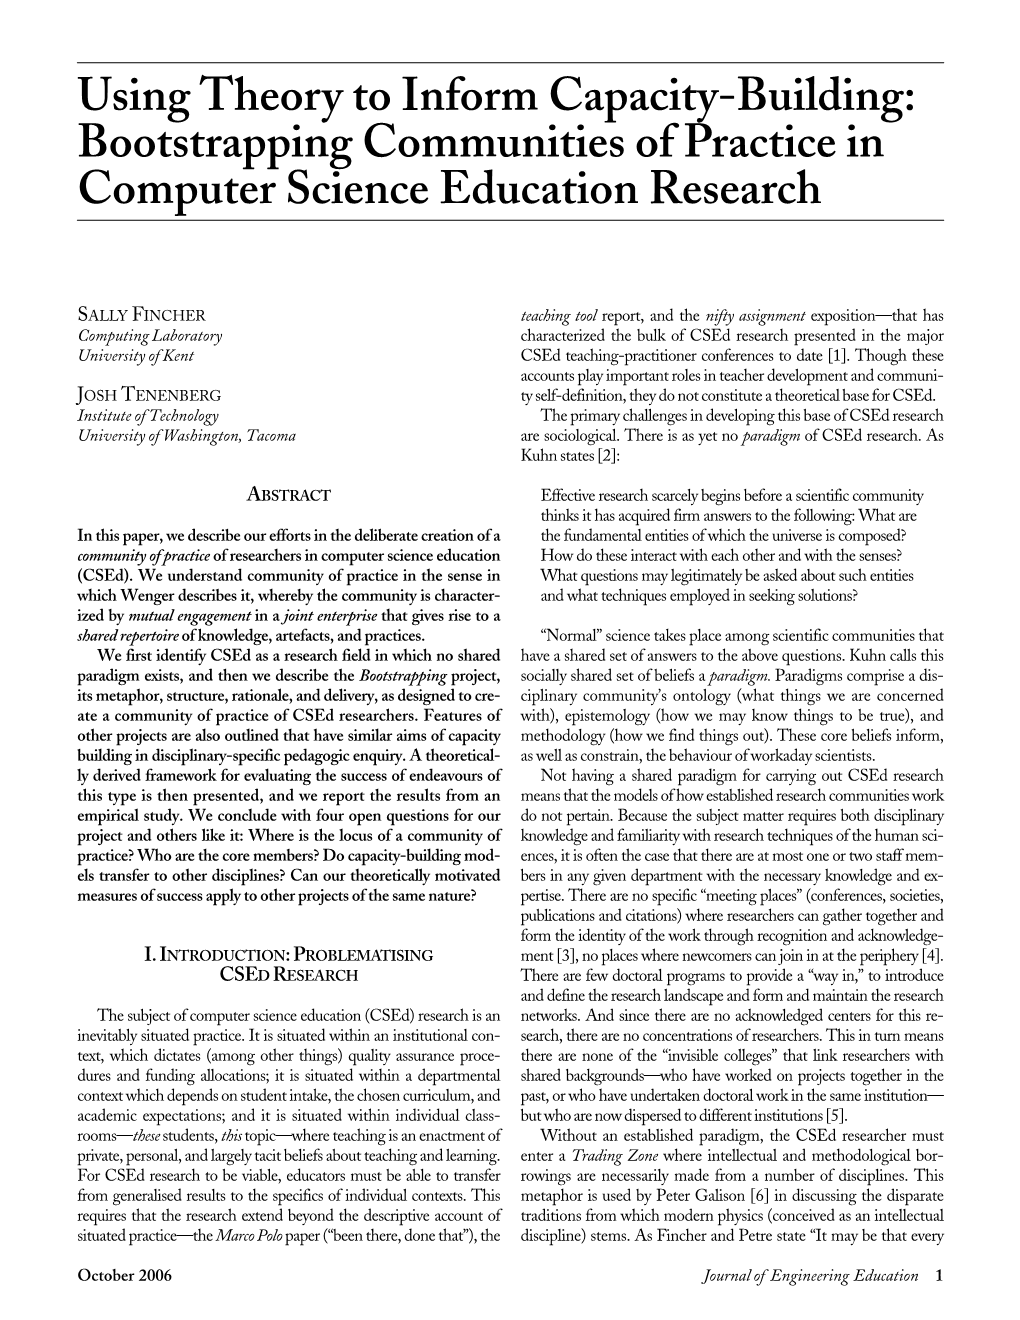 Bootstrapping Communities of Practice in Computer Science Education Research